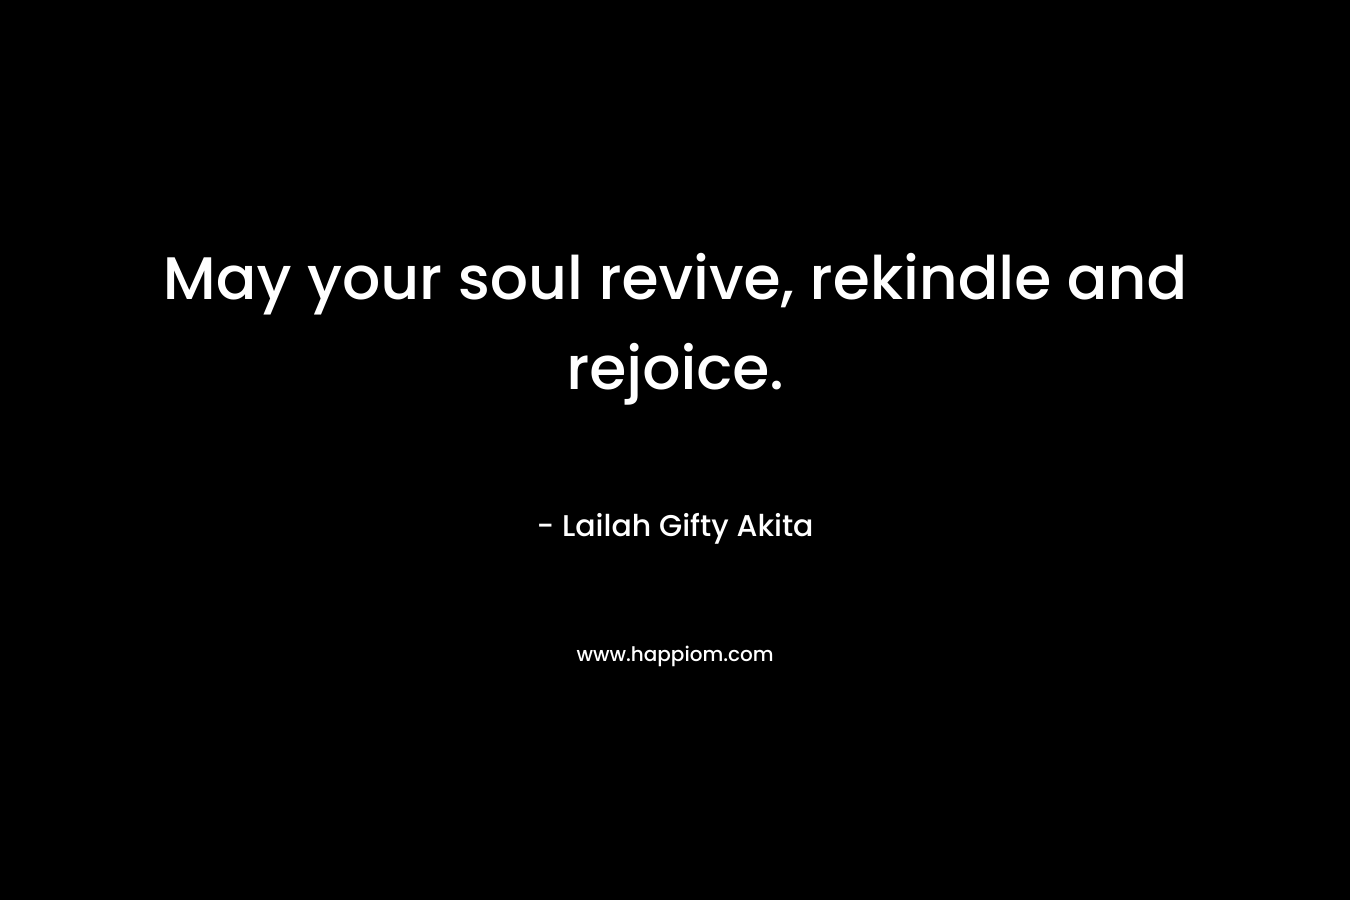 May your soul revive, rekindle and rejoice.